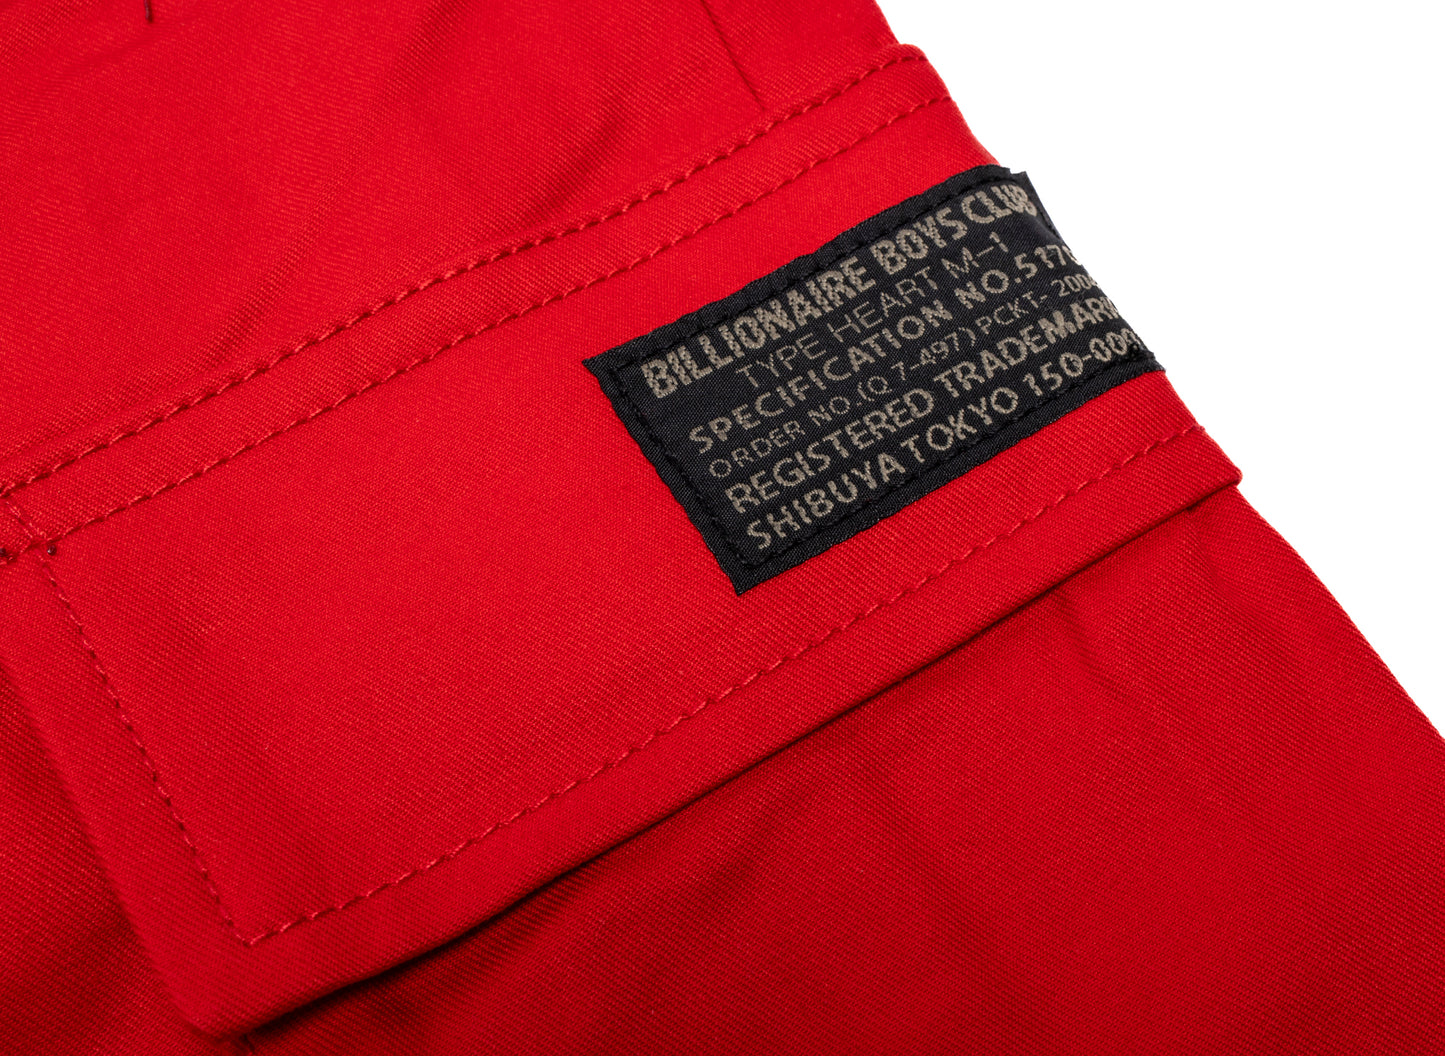 BBC Flagship II Pants in Red xld